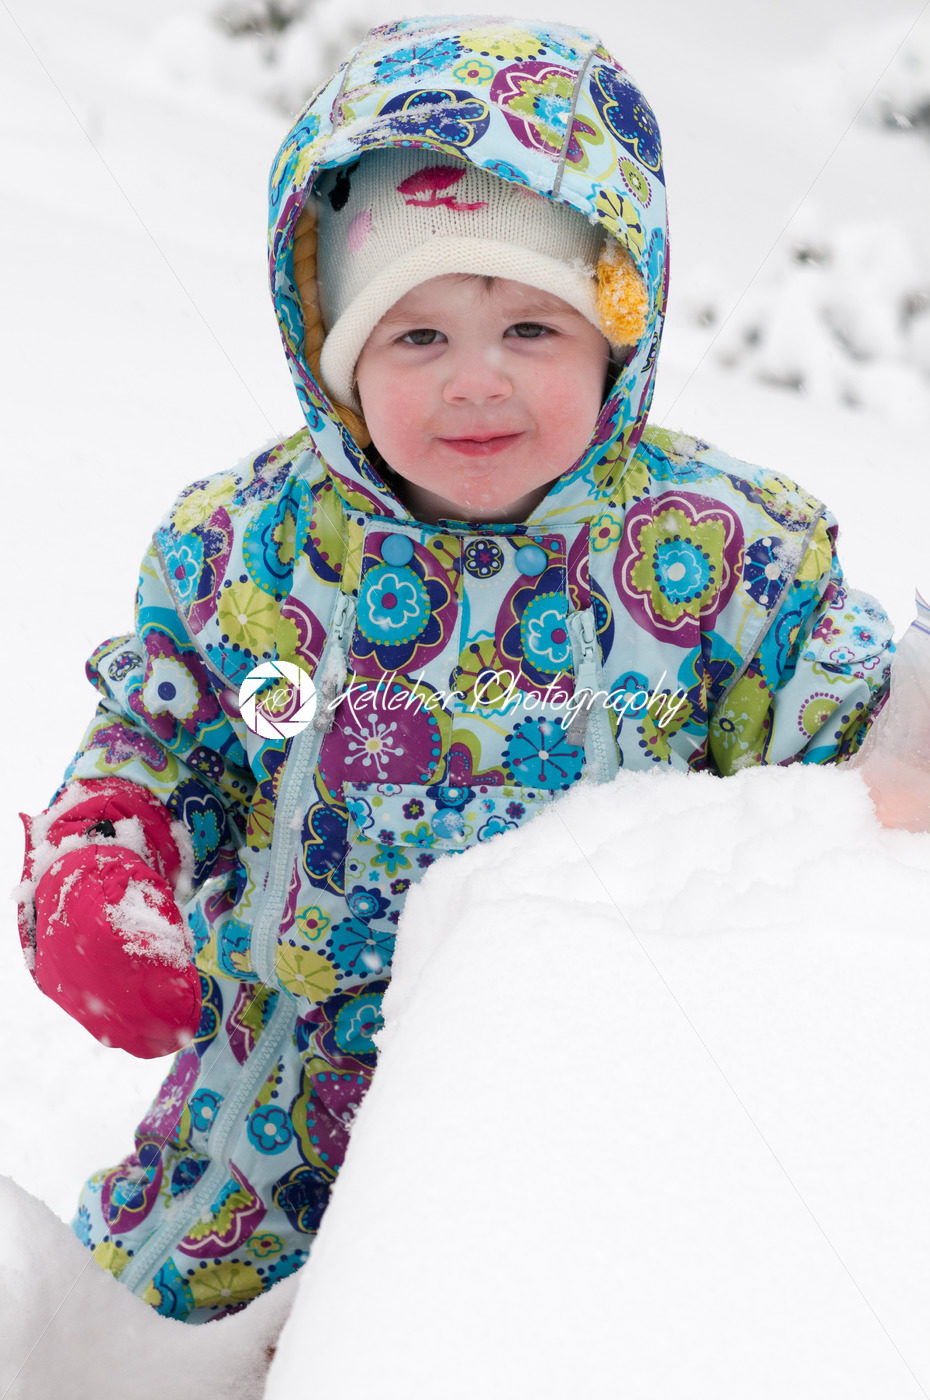 Happy toddler girl in warm coat and knitted hat tossing up snow and having a fun in the winter outside, outdoor portrait - Kelleher Photography Store